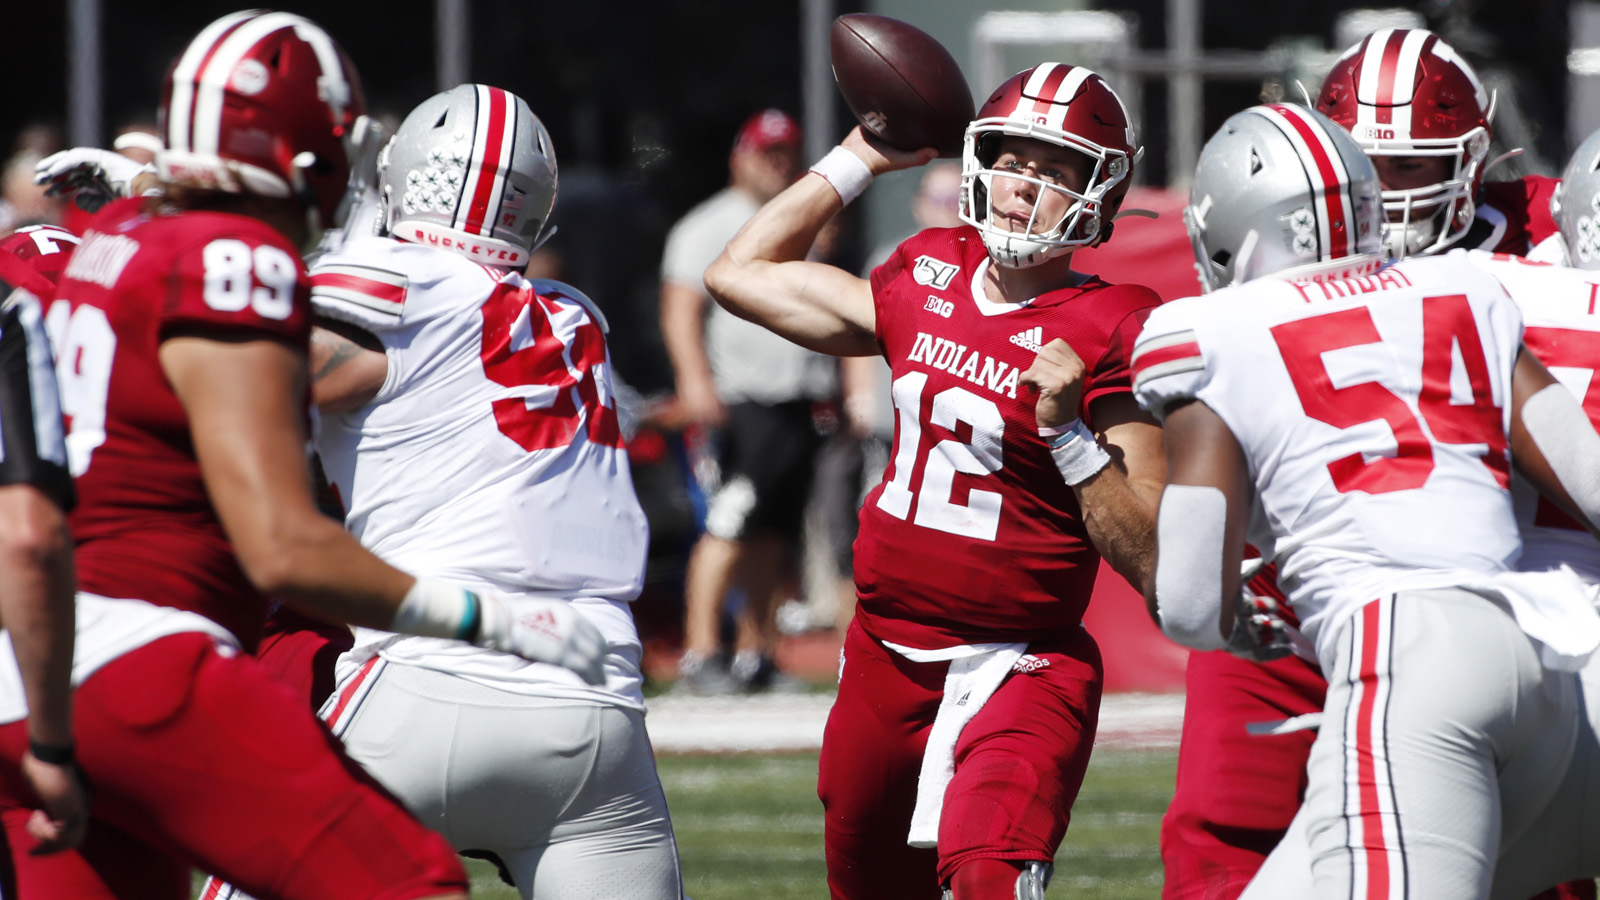 Hoosiers unable to contain dominant Buckeyes in 51-10 loss